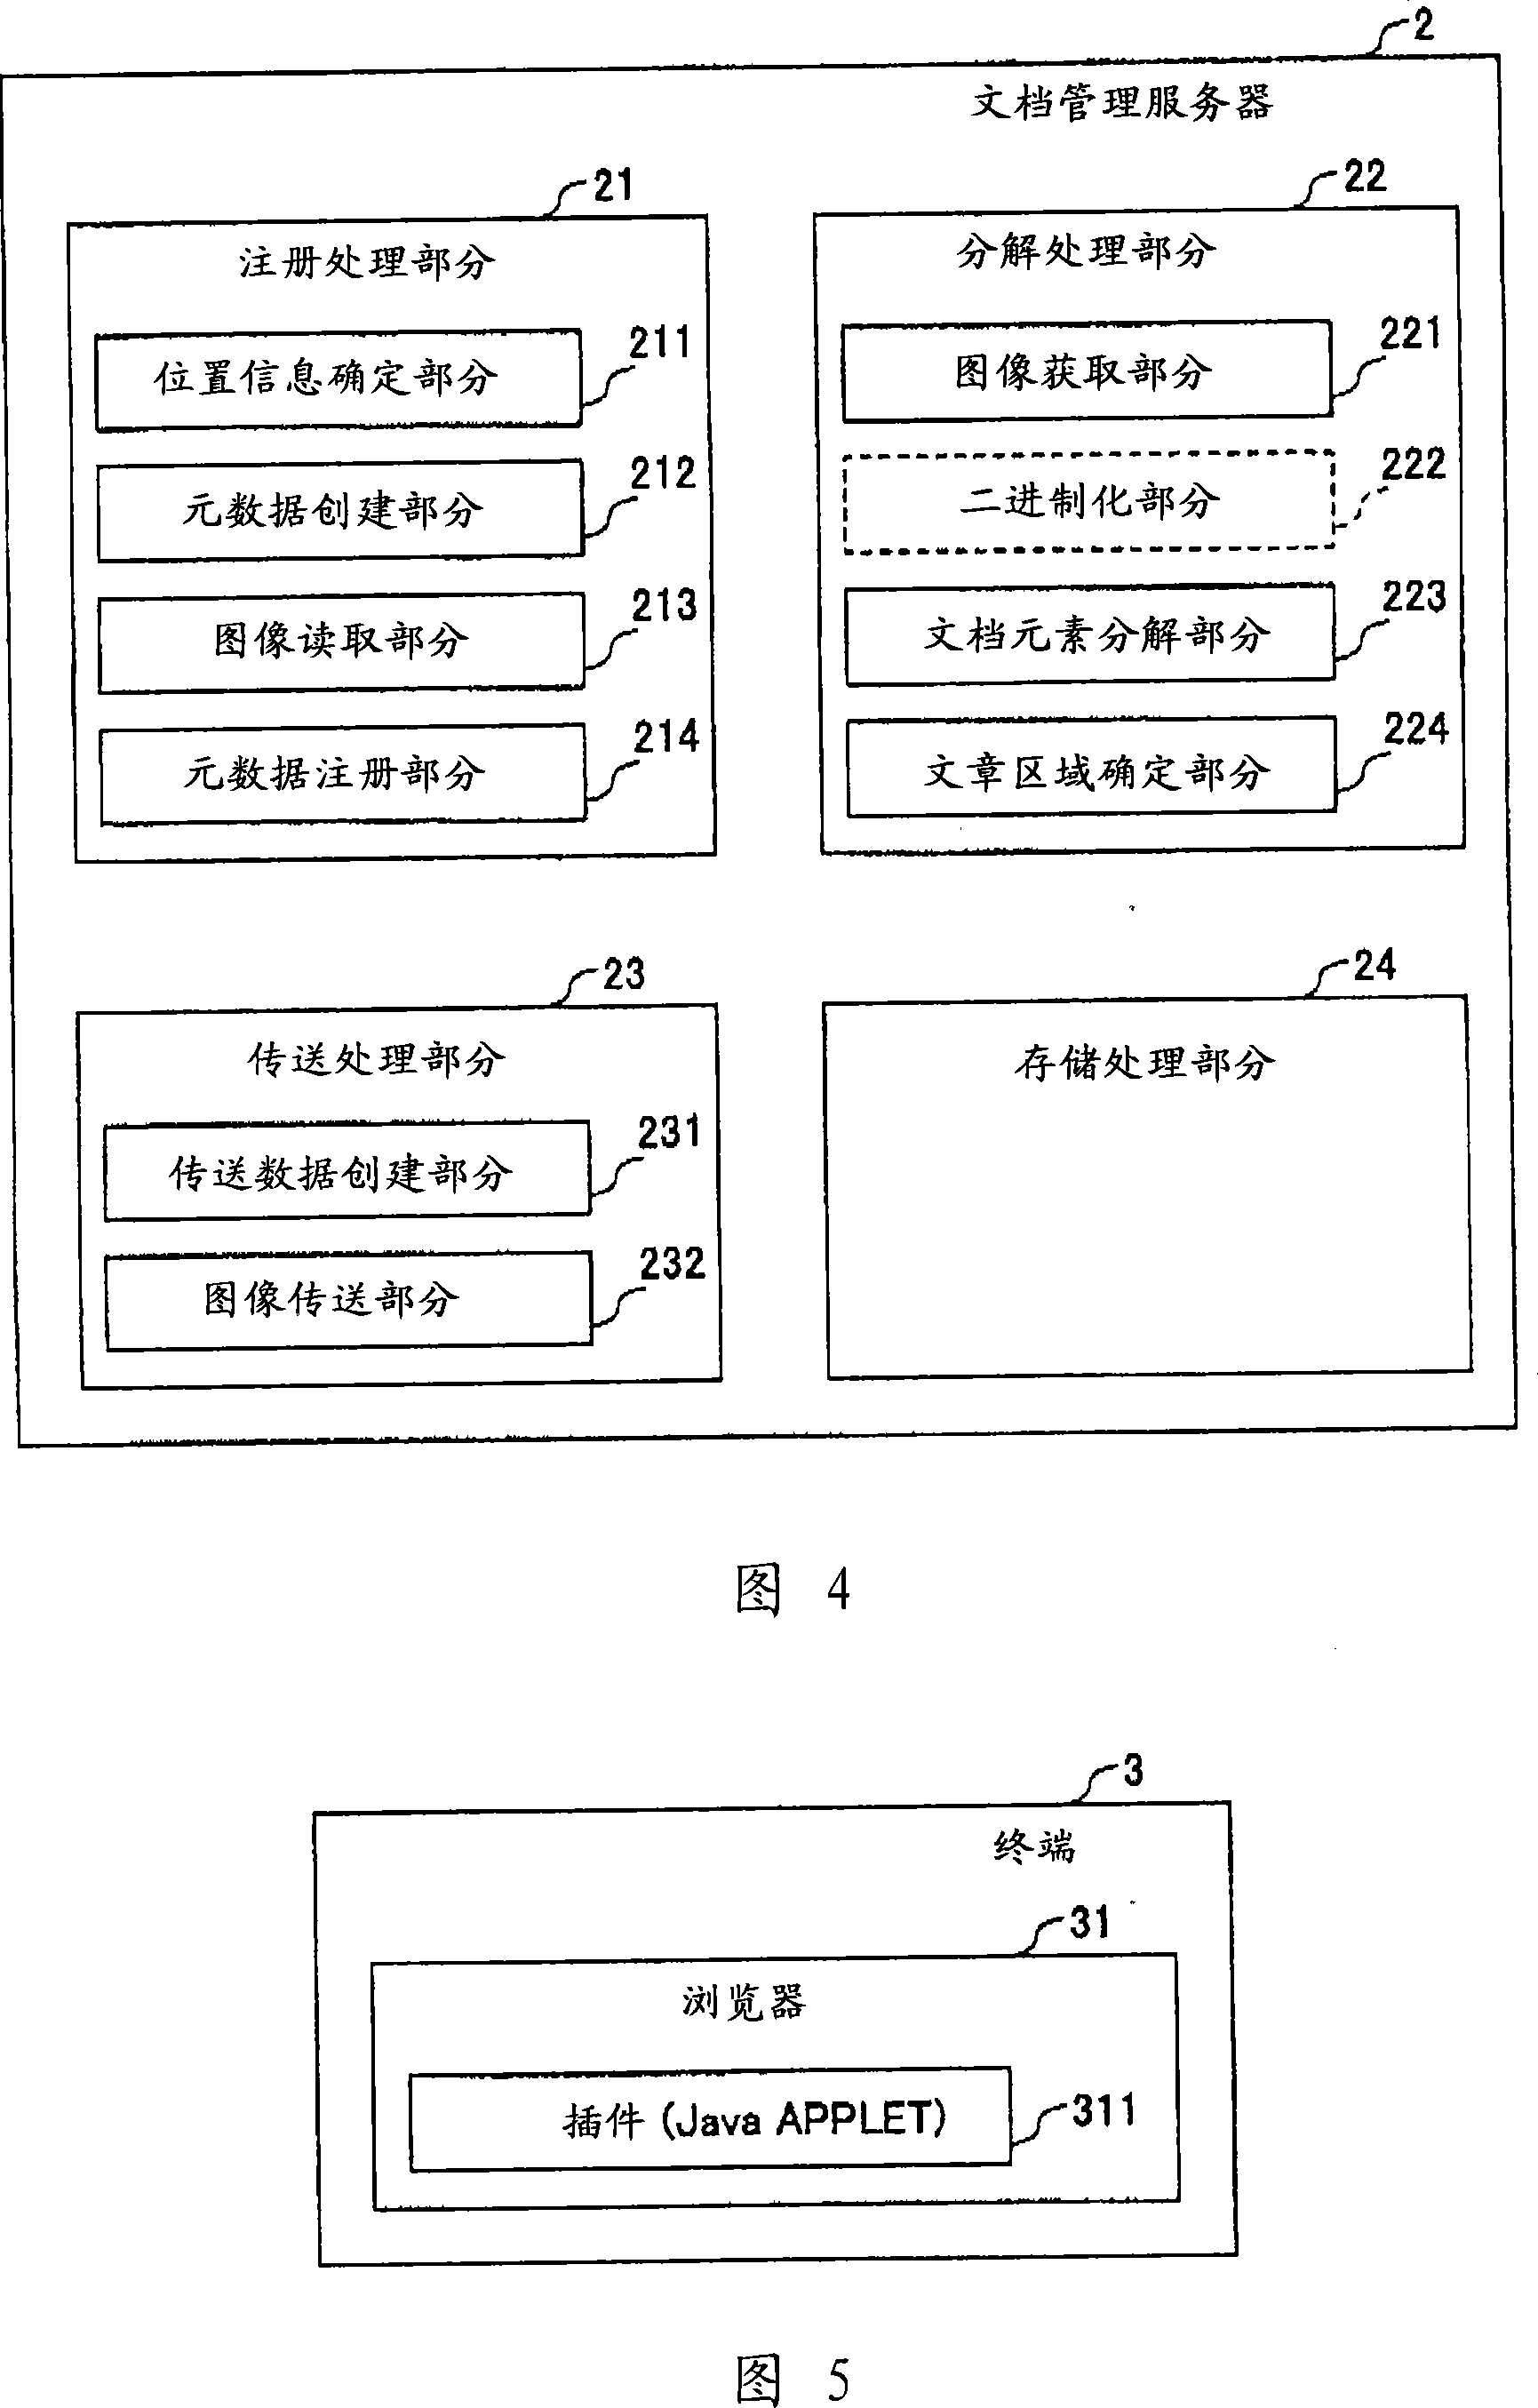 Image reading system